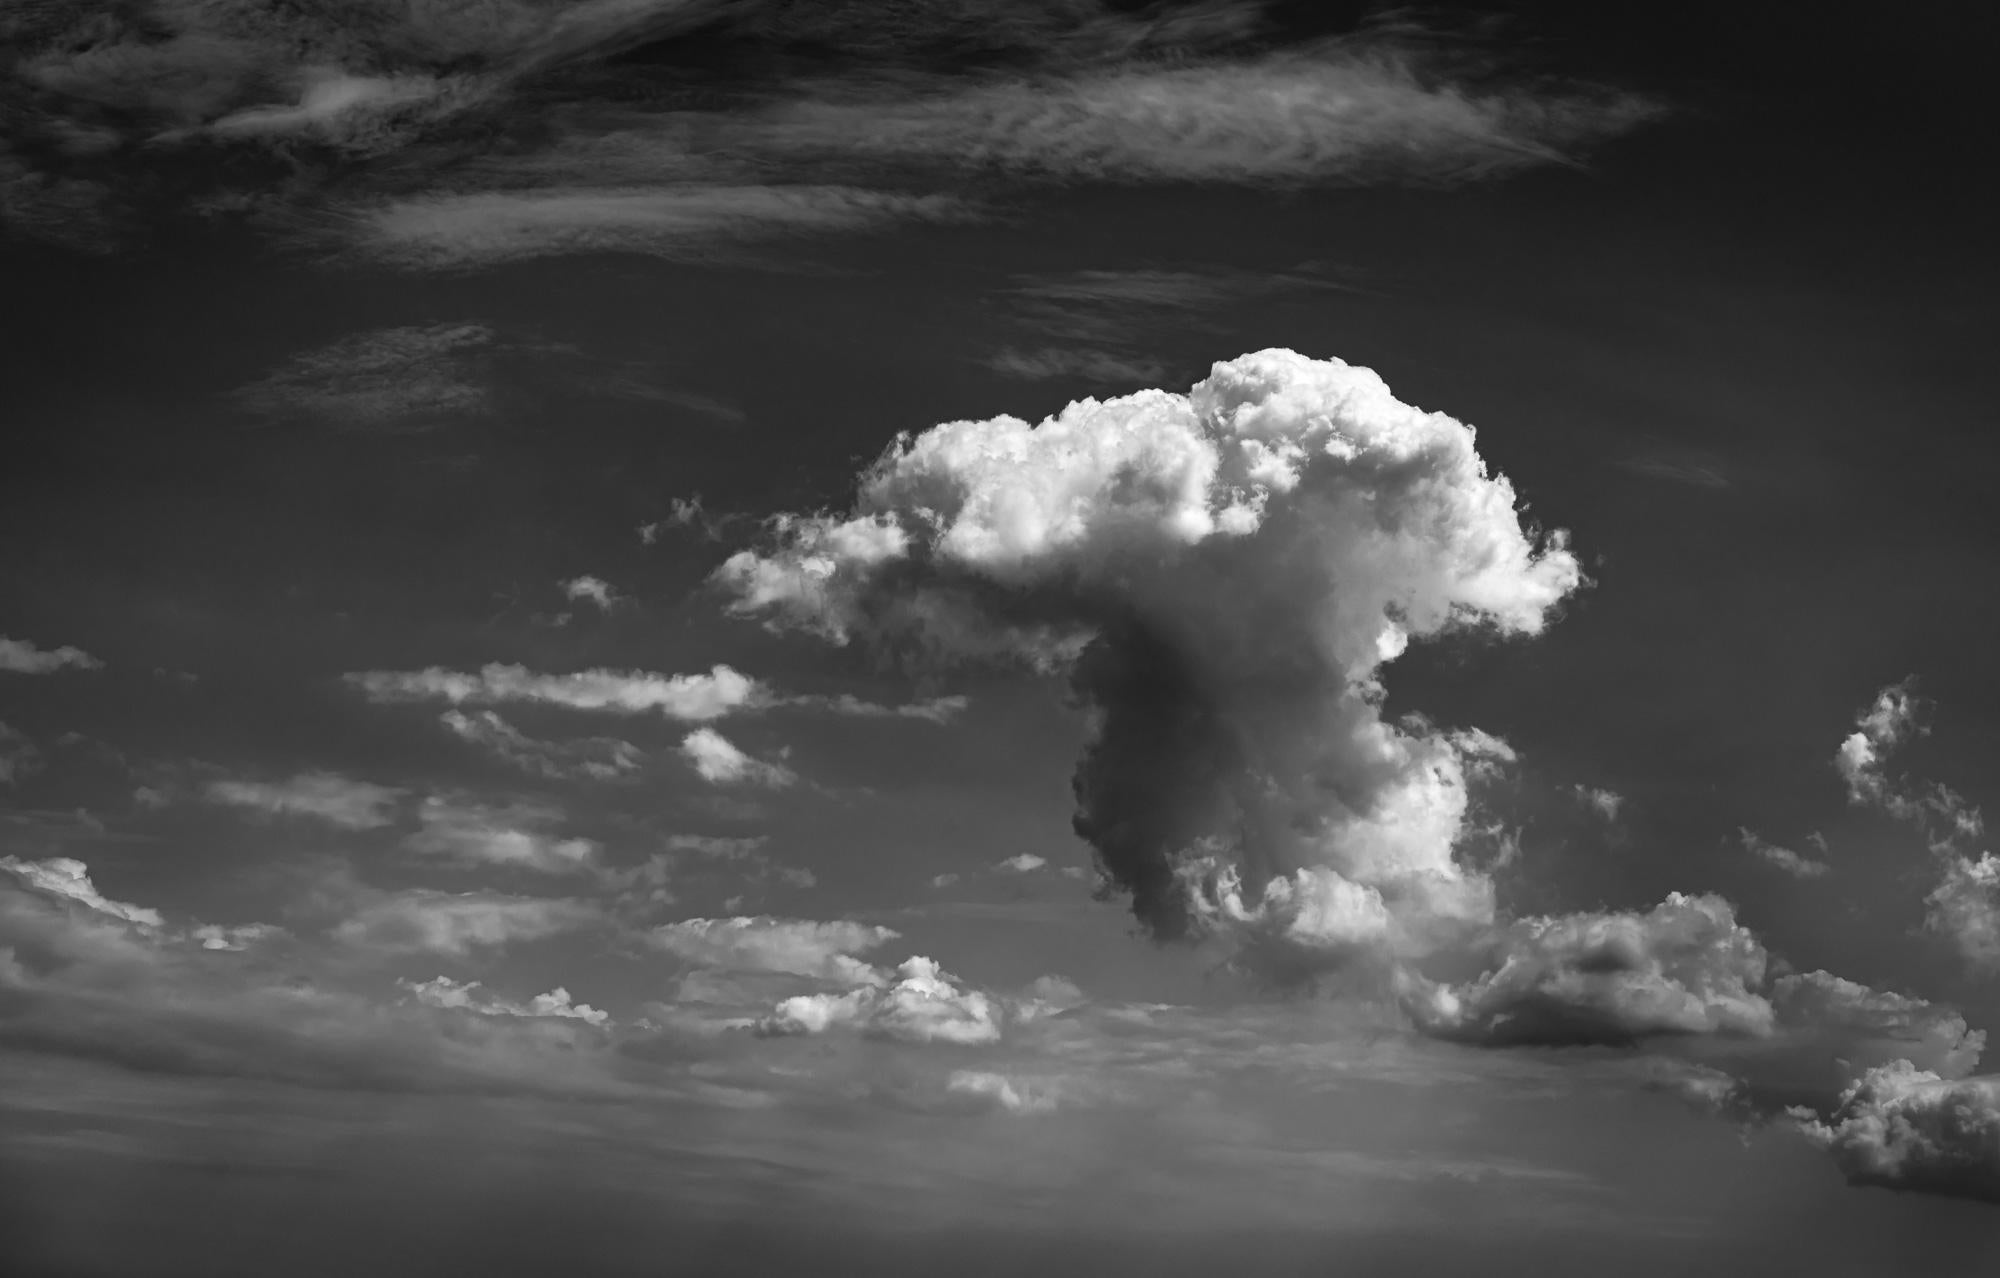 Howard Lewis Landscape Photograph - Limited Edition Black and White Photograph, Clouds, Sky - "Searching"